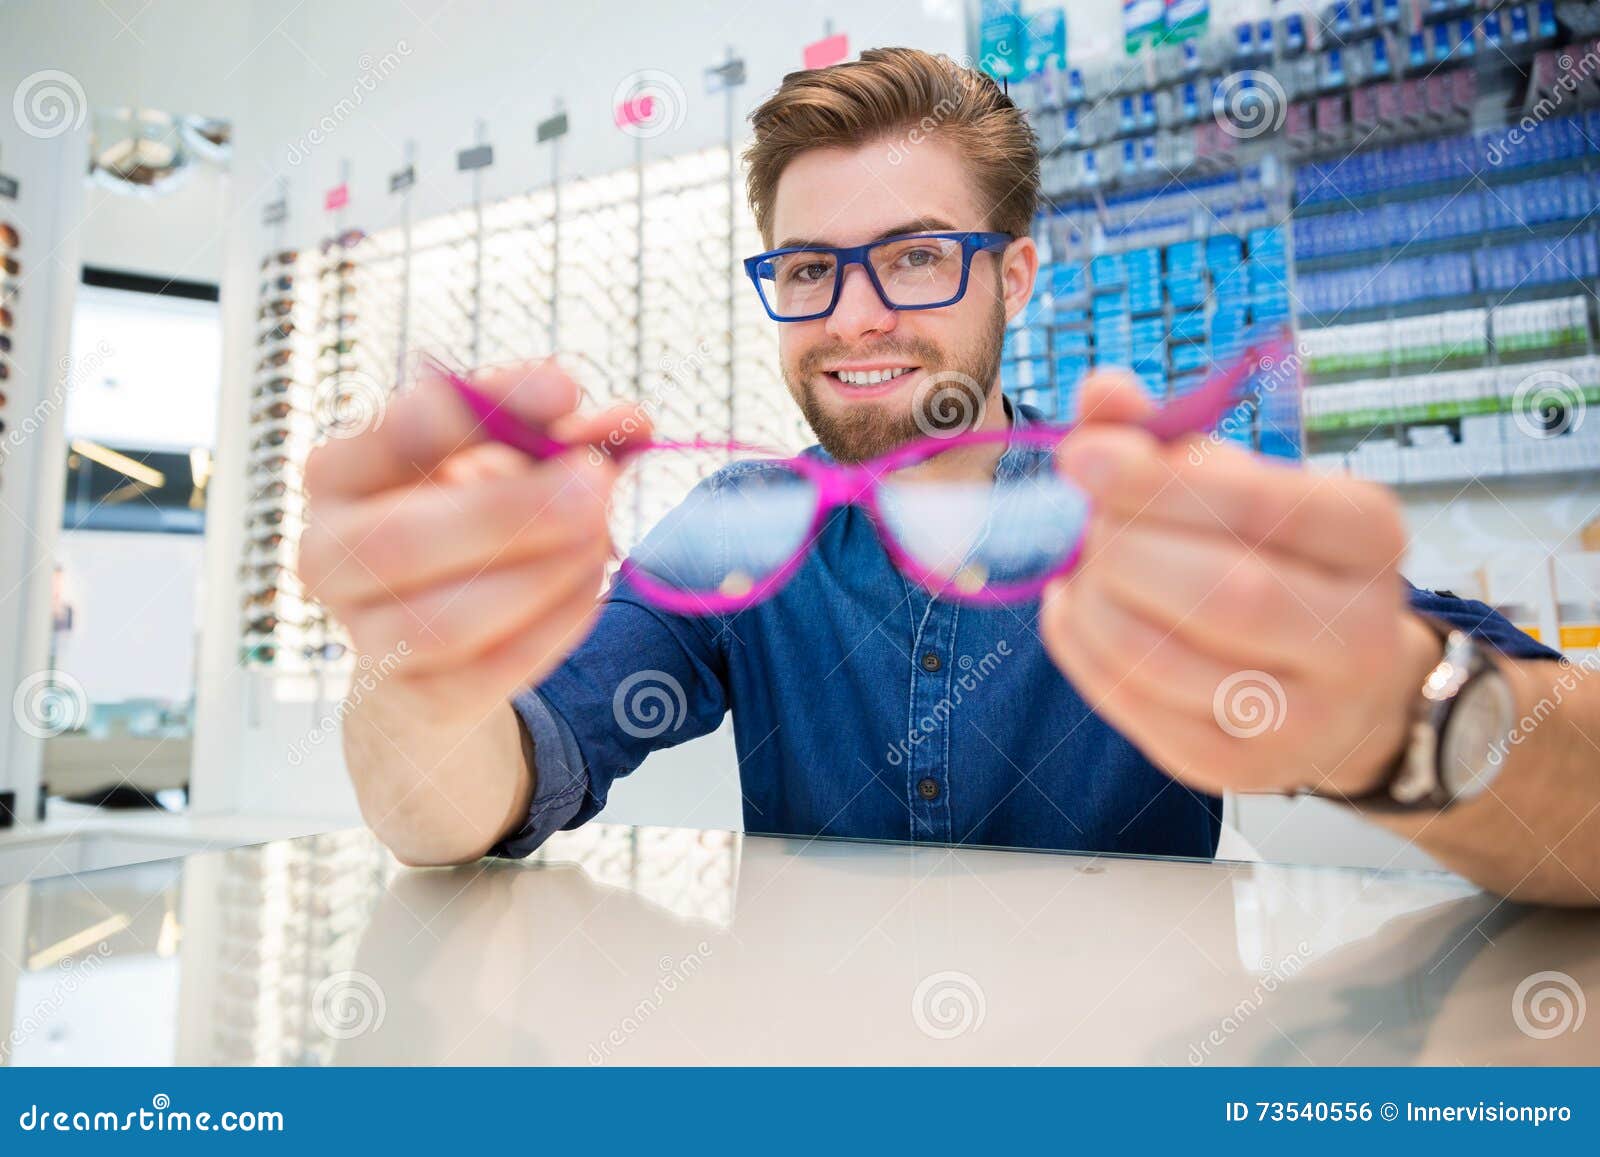 Pink glasses stock photo. Image of inside, interior, handsome - 73540556